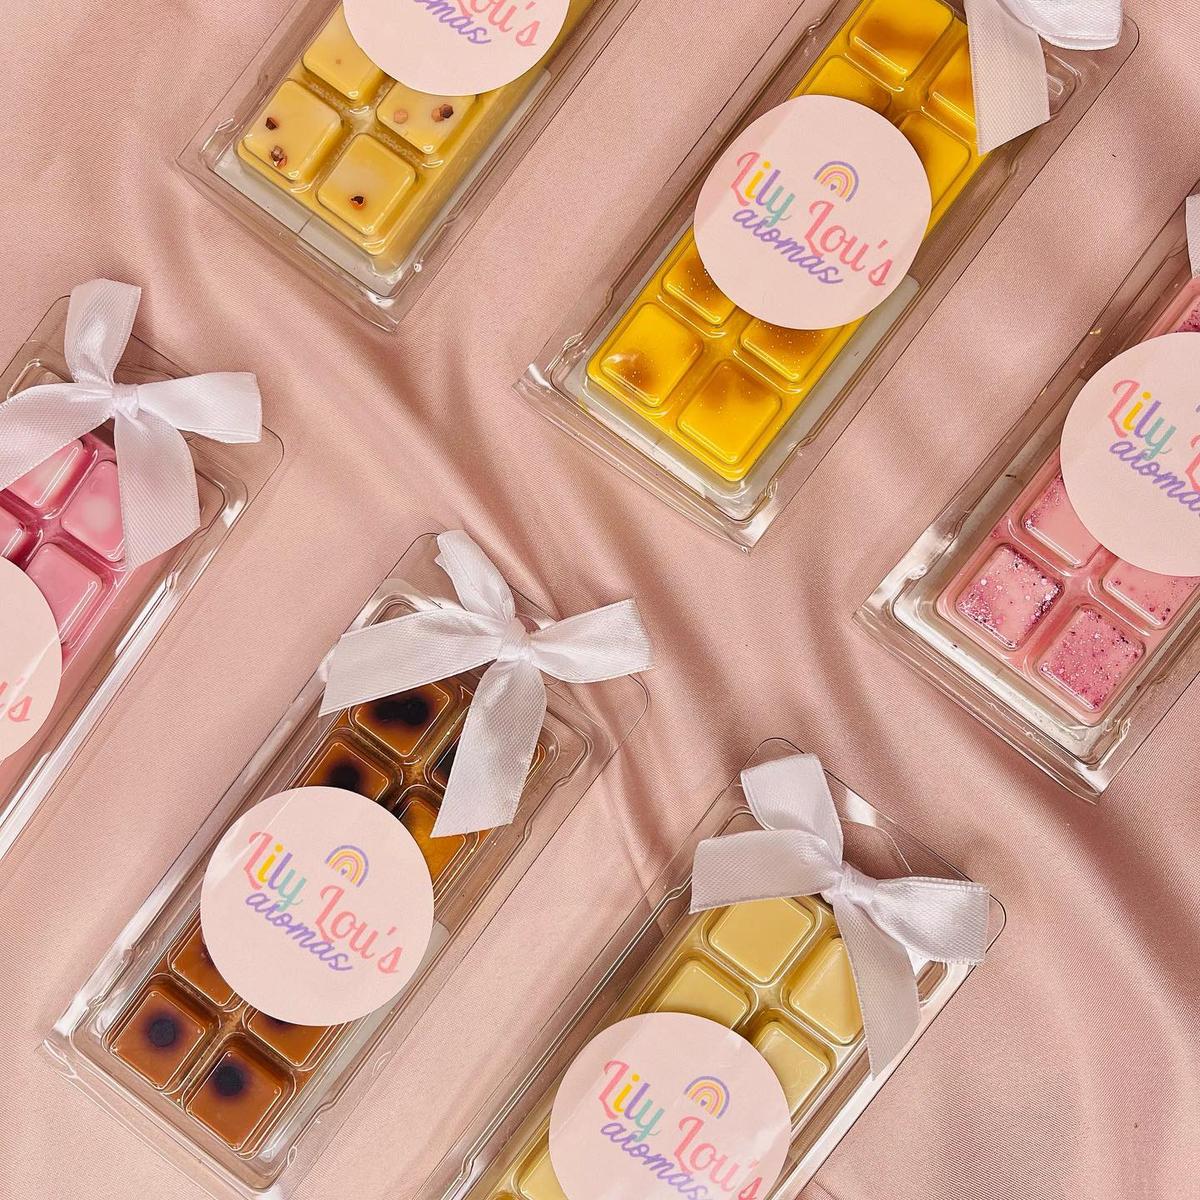 Samples from Lilly Lou's Aromas. (Courtesy ofLily Lou’s Aromas)